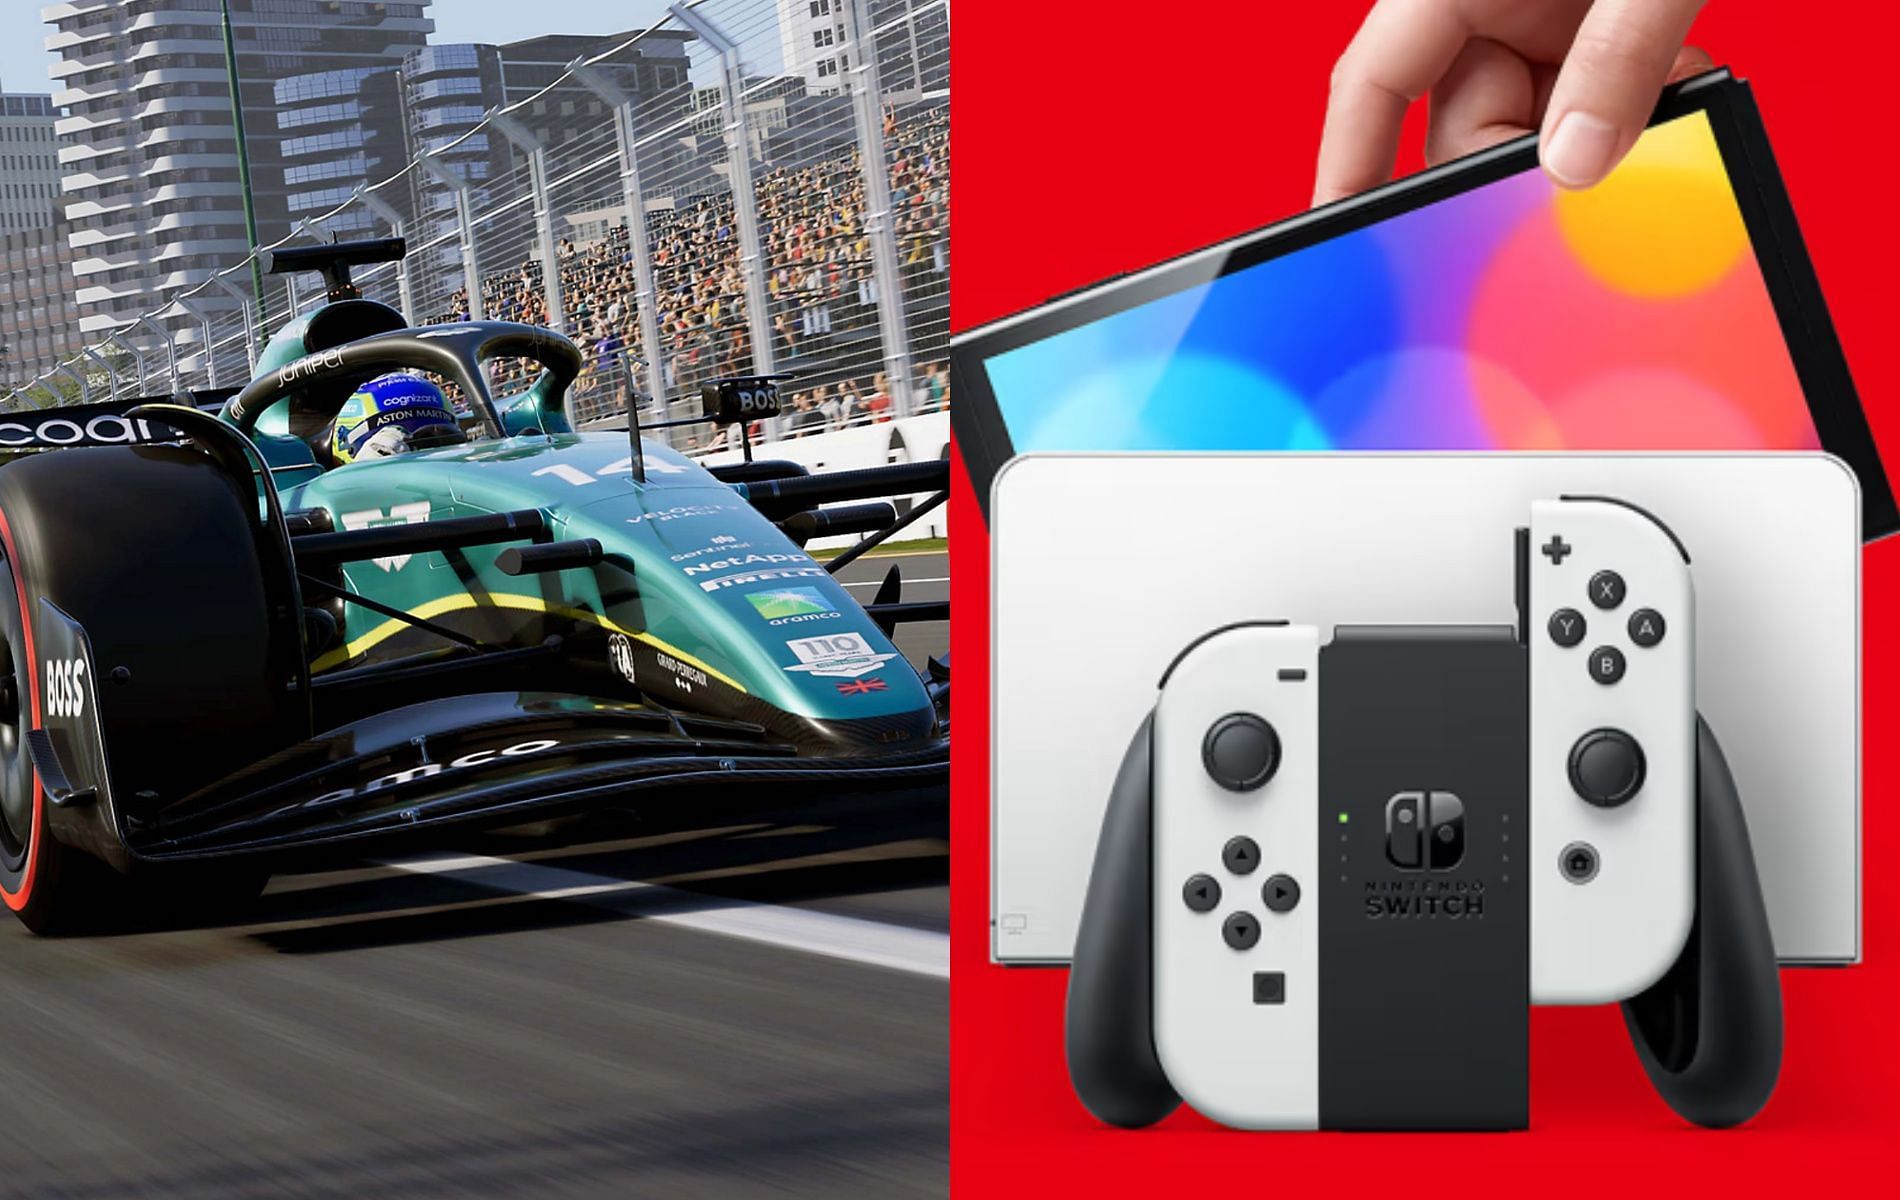 Nintendo Switch: Is F1 23 available on the Nintendo Switch?